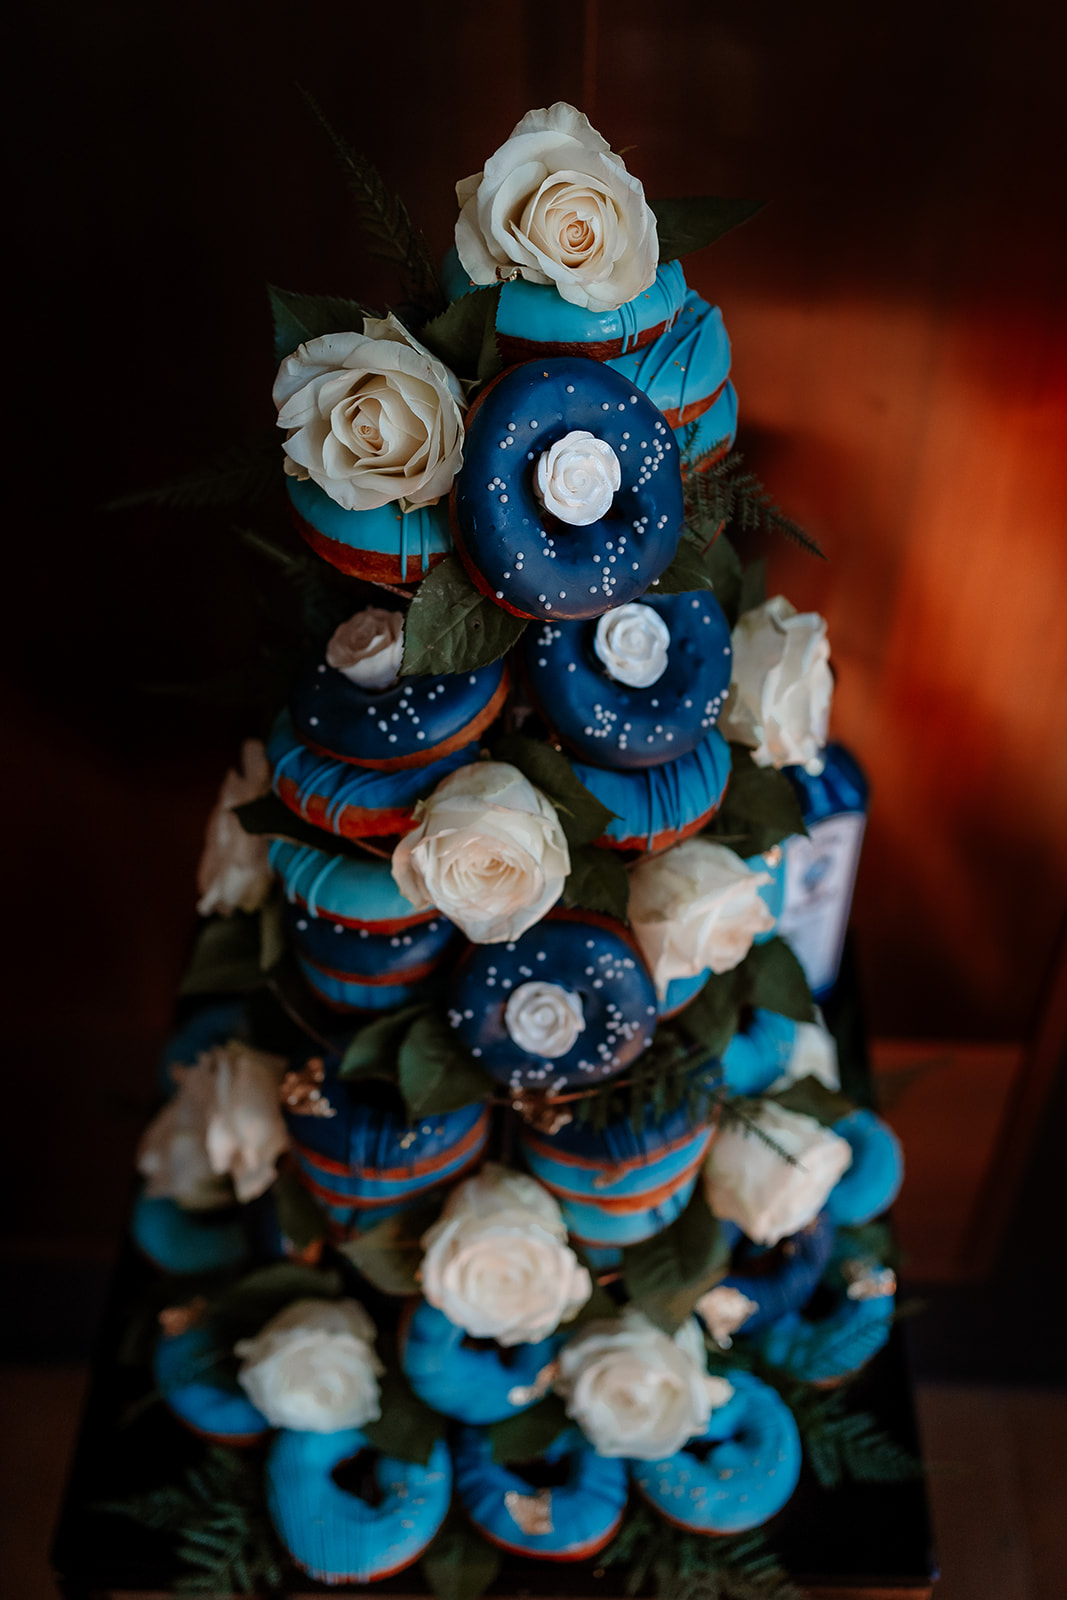 A tower of ring doughnuts decorated with blue icing and white roses. 